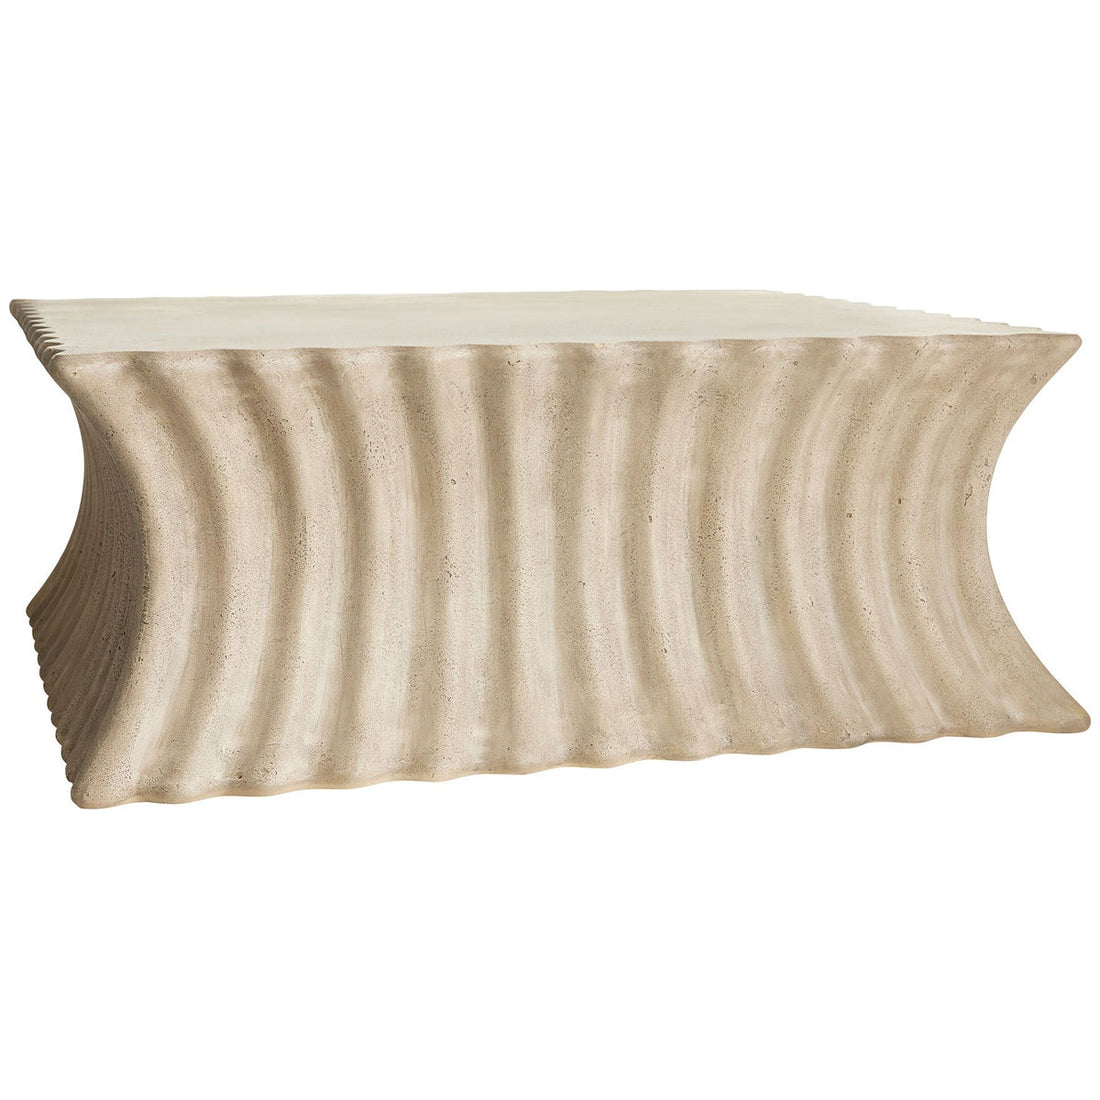 Arteriors Wave Cocktail Table